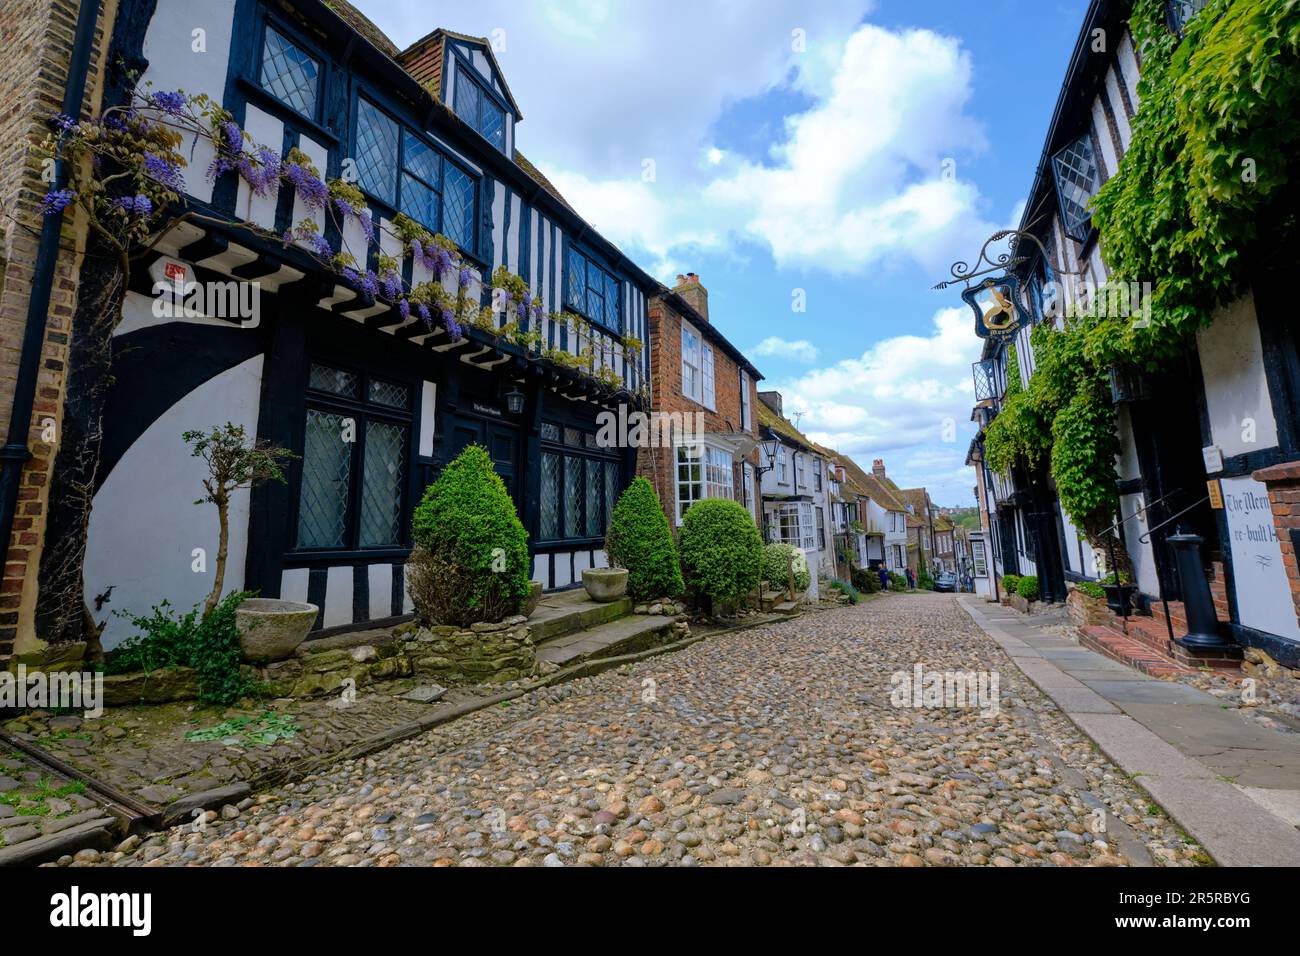 Rye, East Sussex, England, Europe - May 18, 2023: The Mermaid - ancient hotel on a cobblestoned street. A small English medieval coastal town on a sun Stock Photo